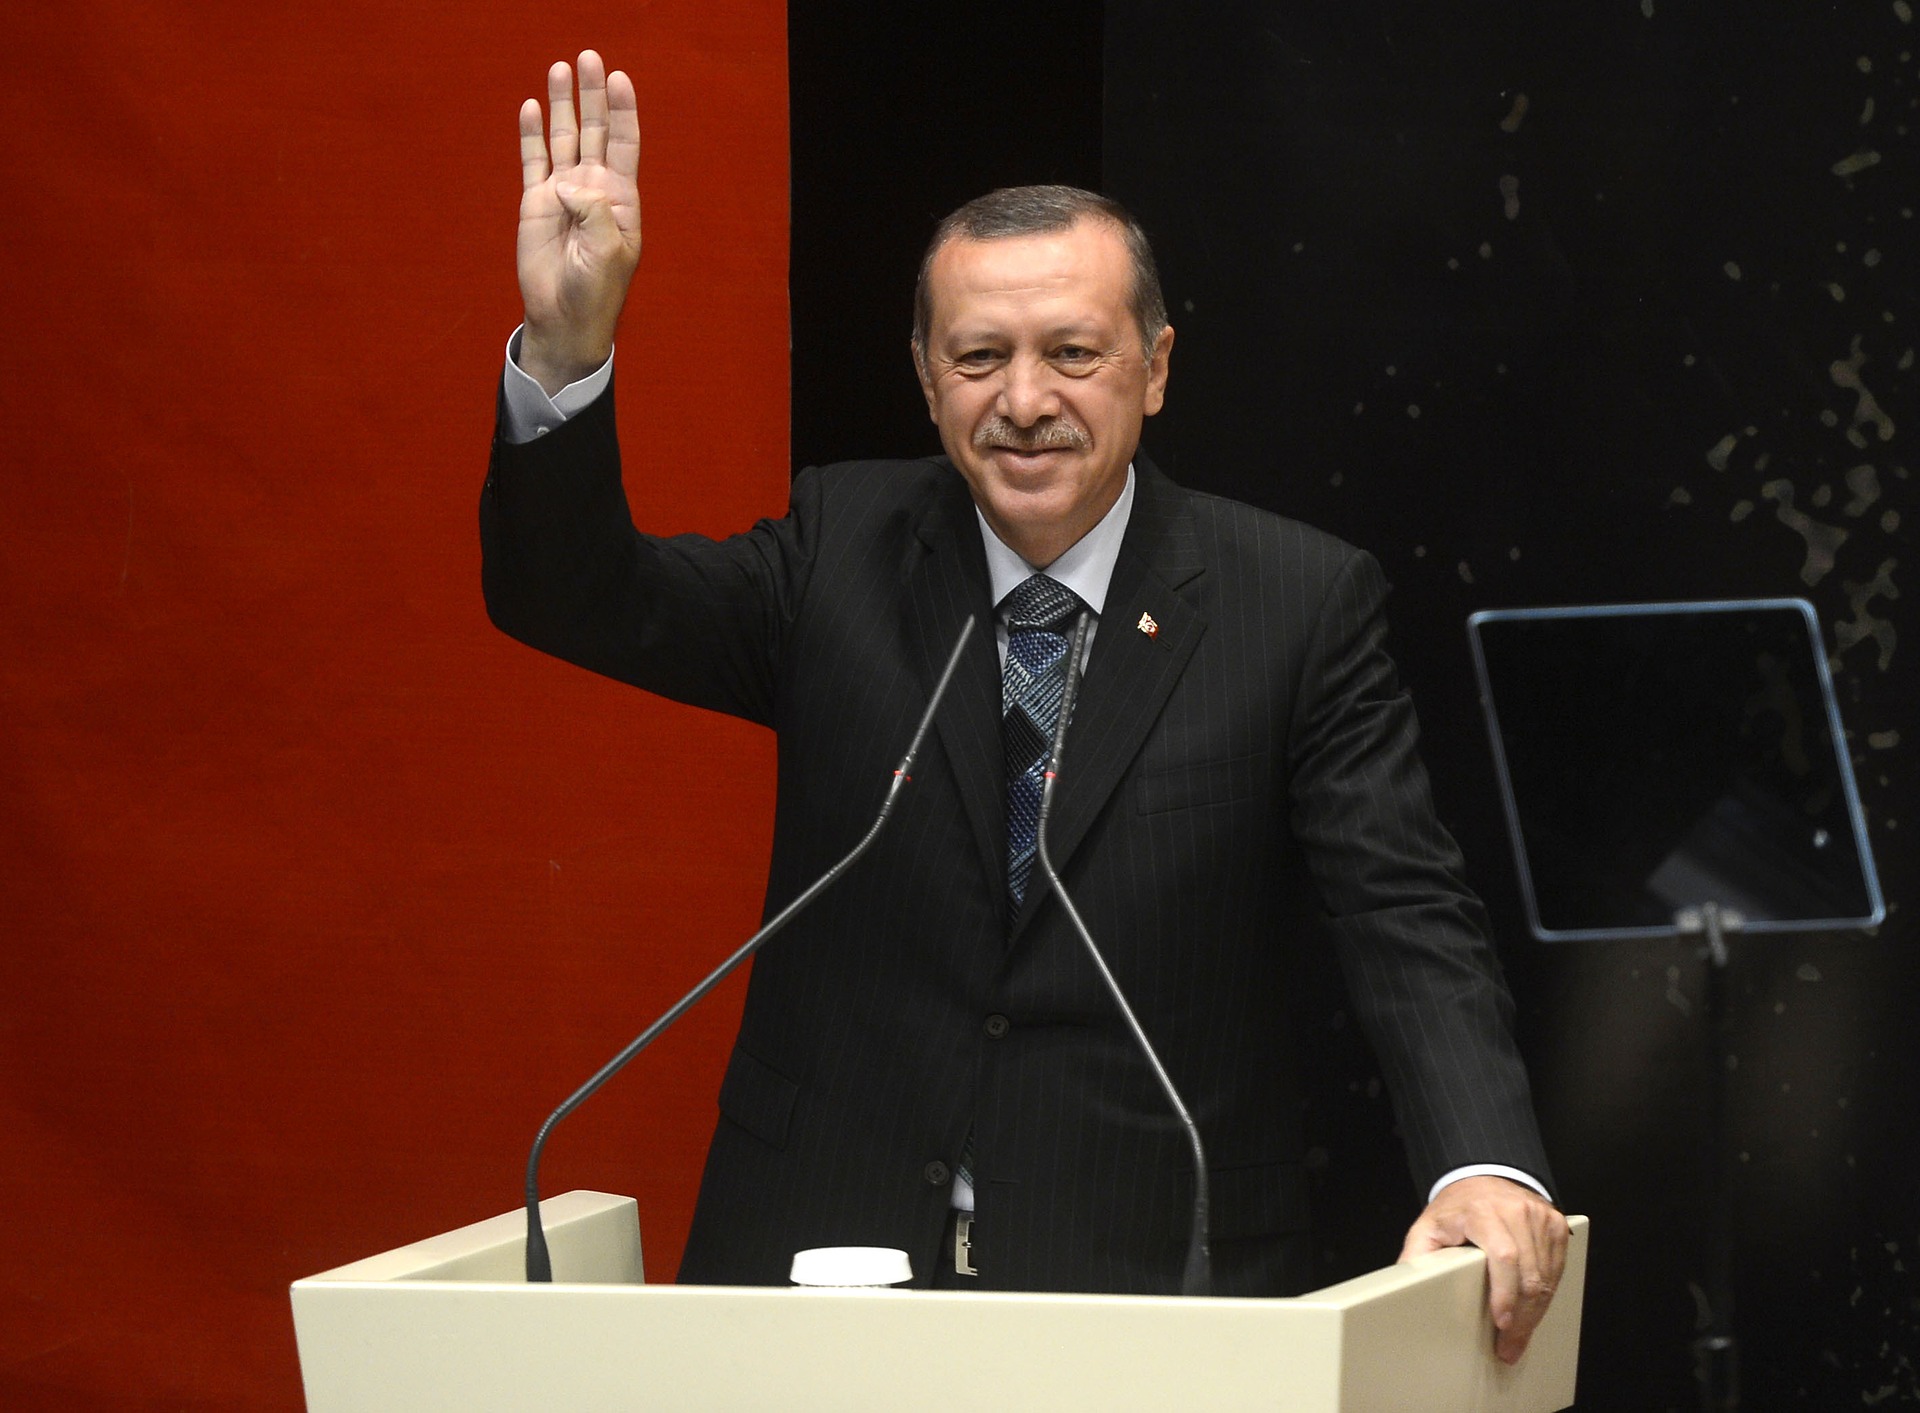 Turkey’s Local Elections and the Future of Erdoğan’s Leadership